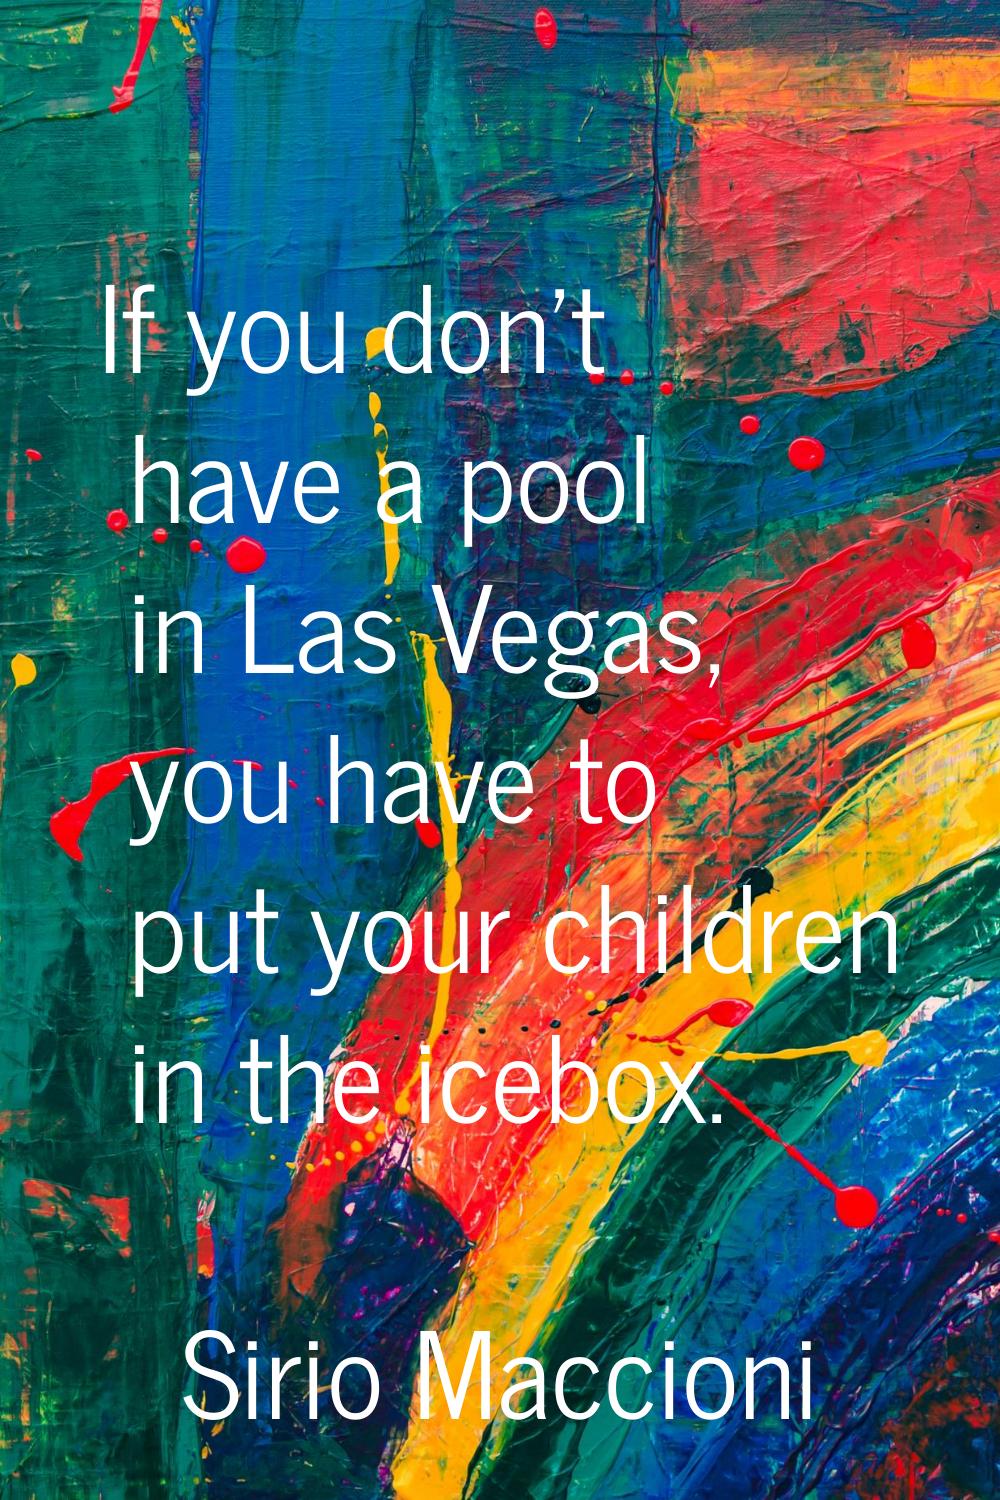 If you don't have a pool in Las Vegas, you have to put your children in the icebox.